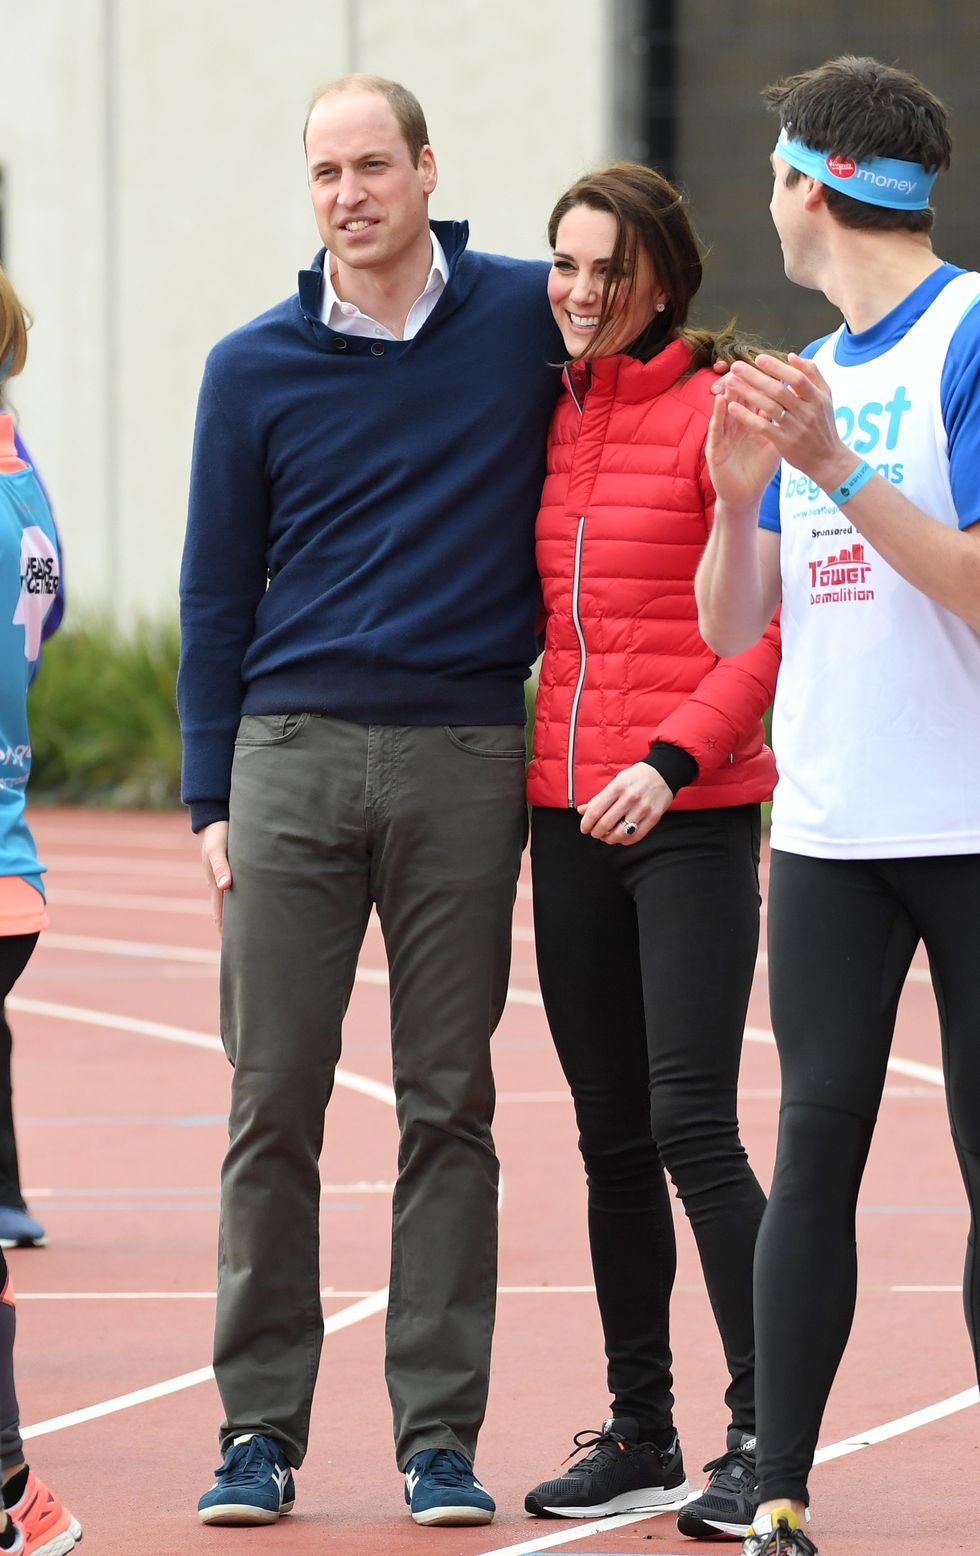 Prince William and Kate Middleton run race | ELLE UK